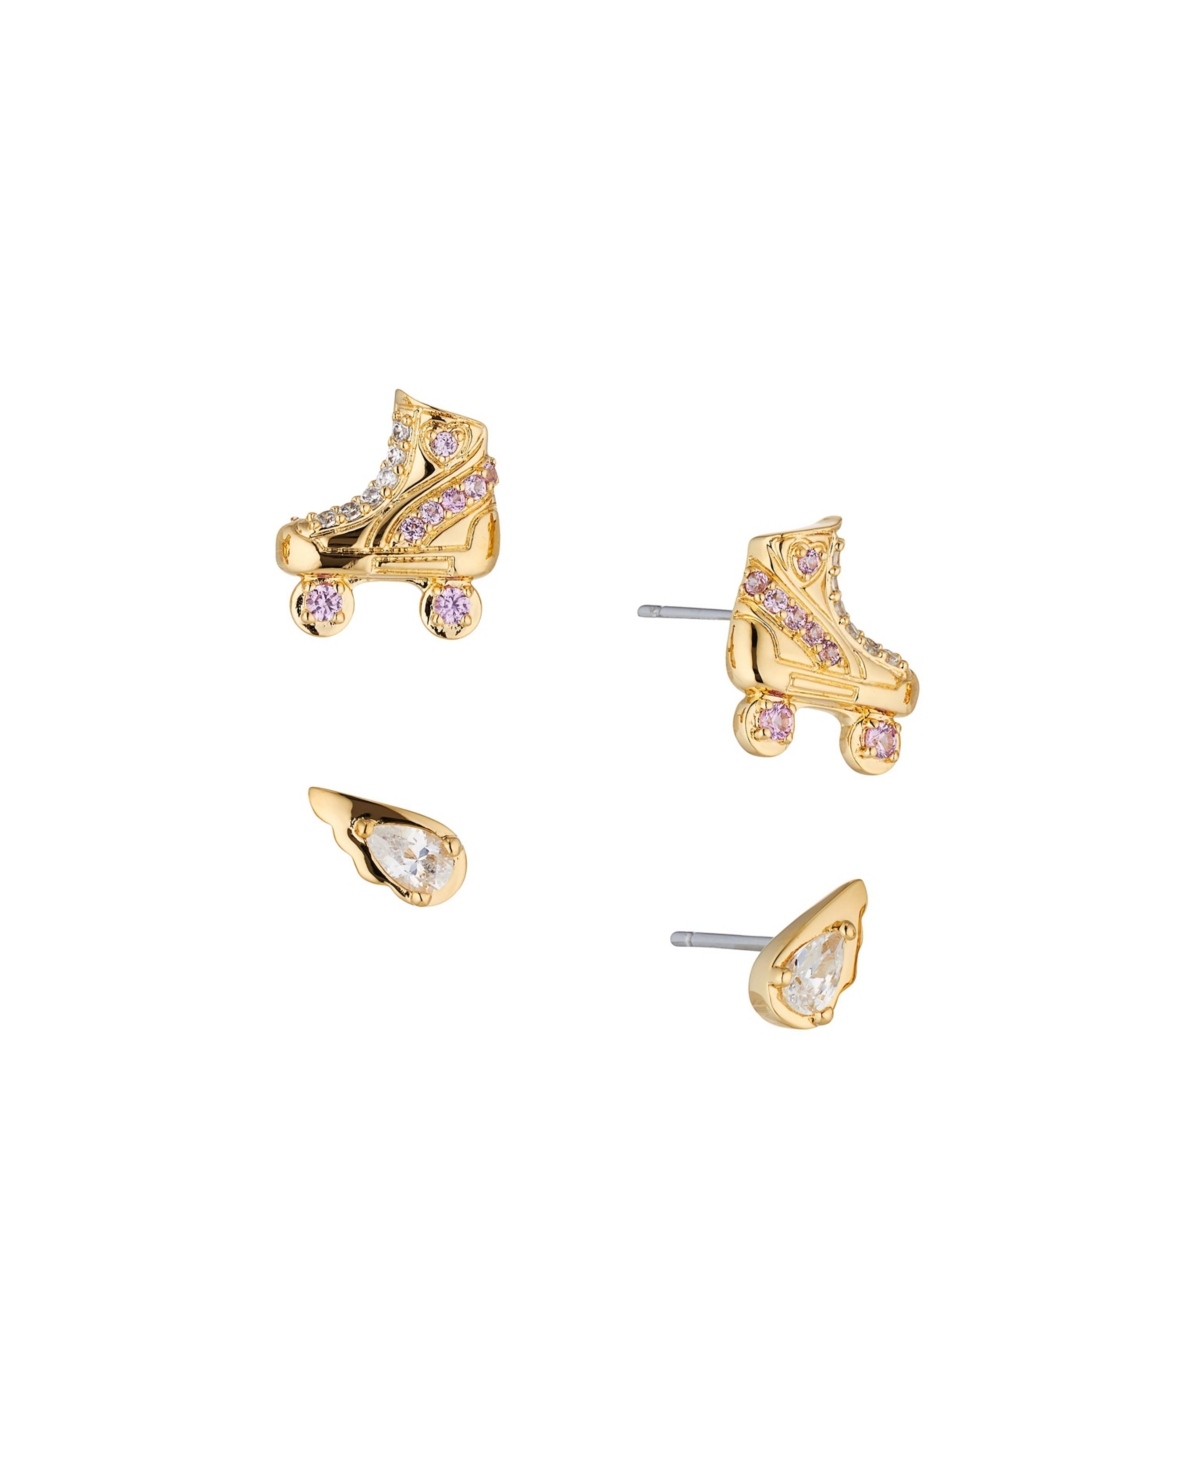 Women's Skate Wing Earring Set, 2 Piece - Gold-Plated